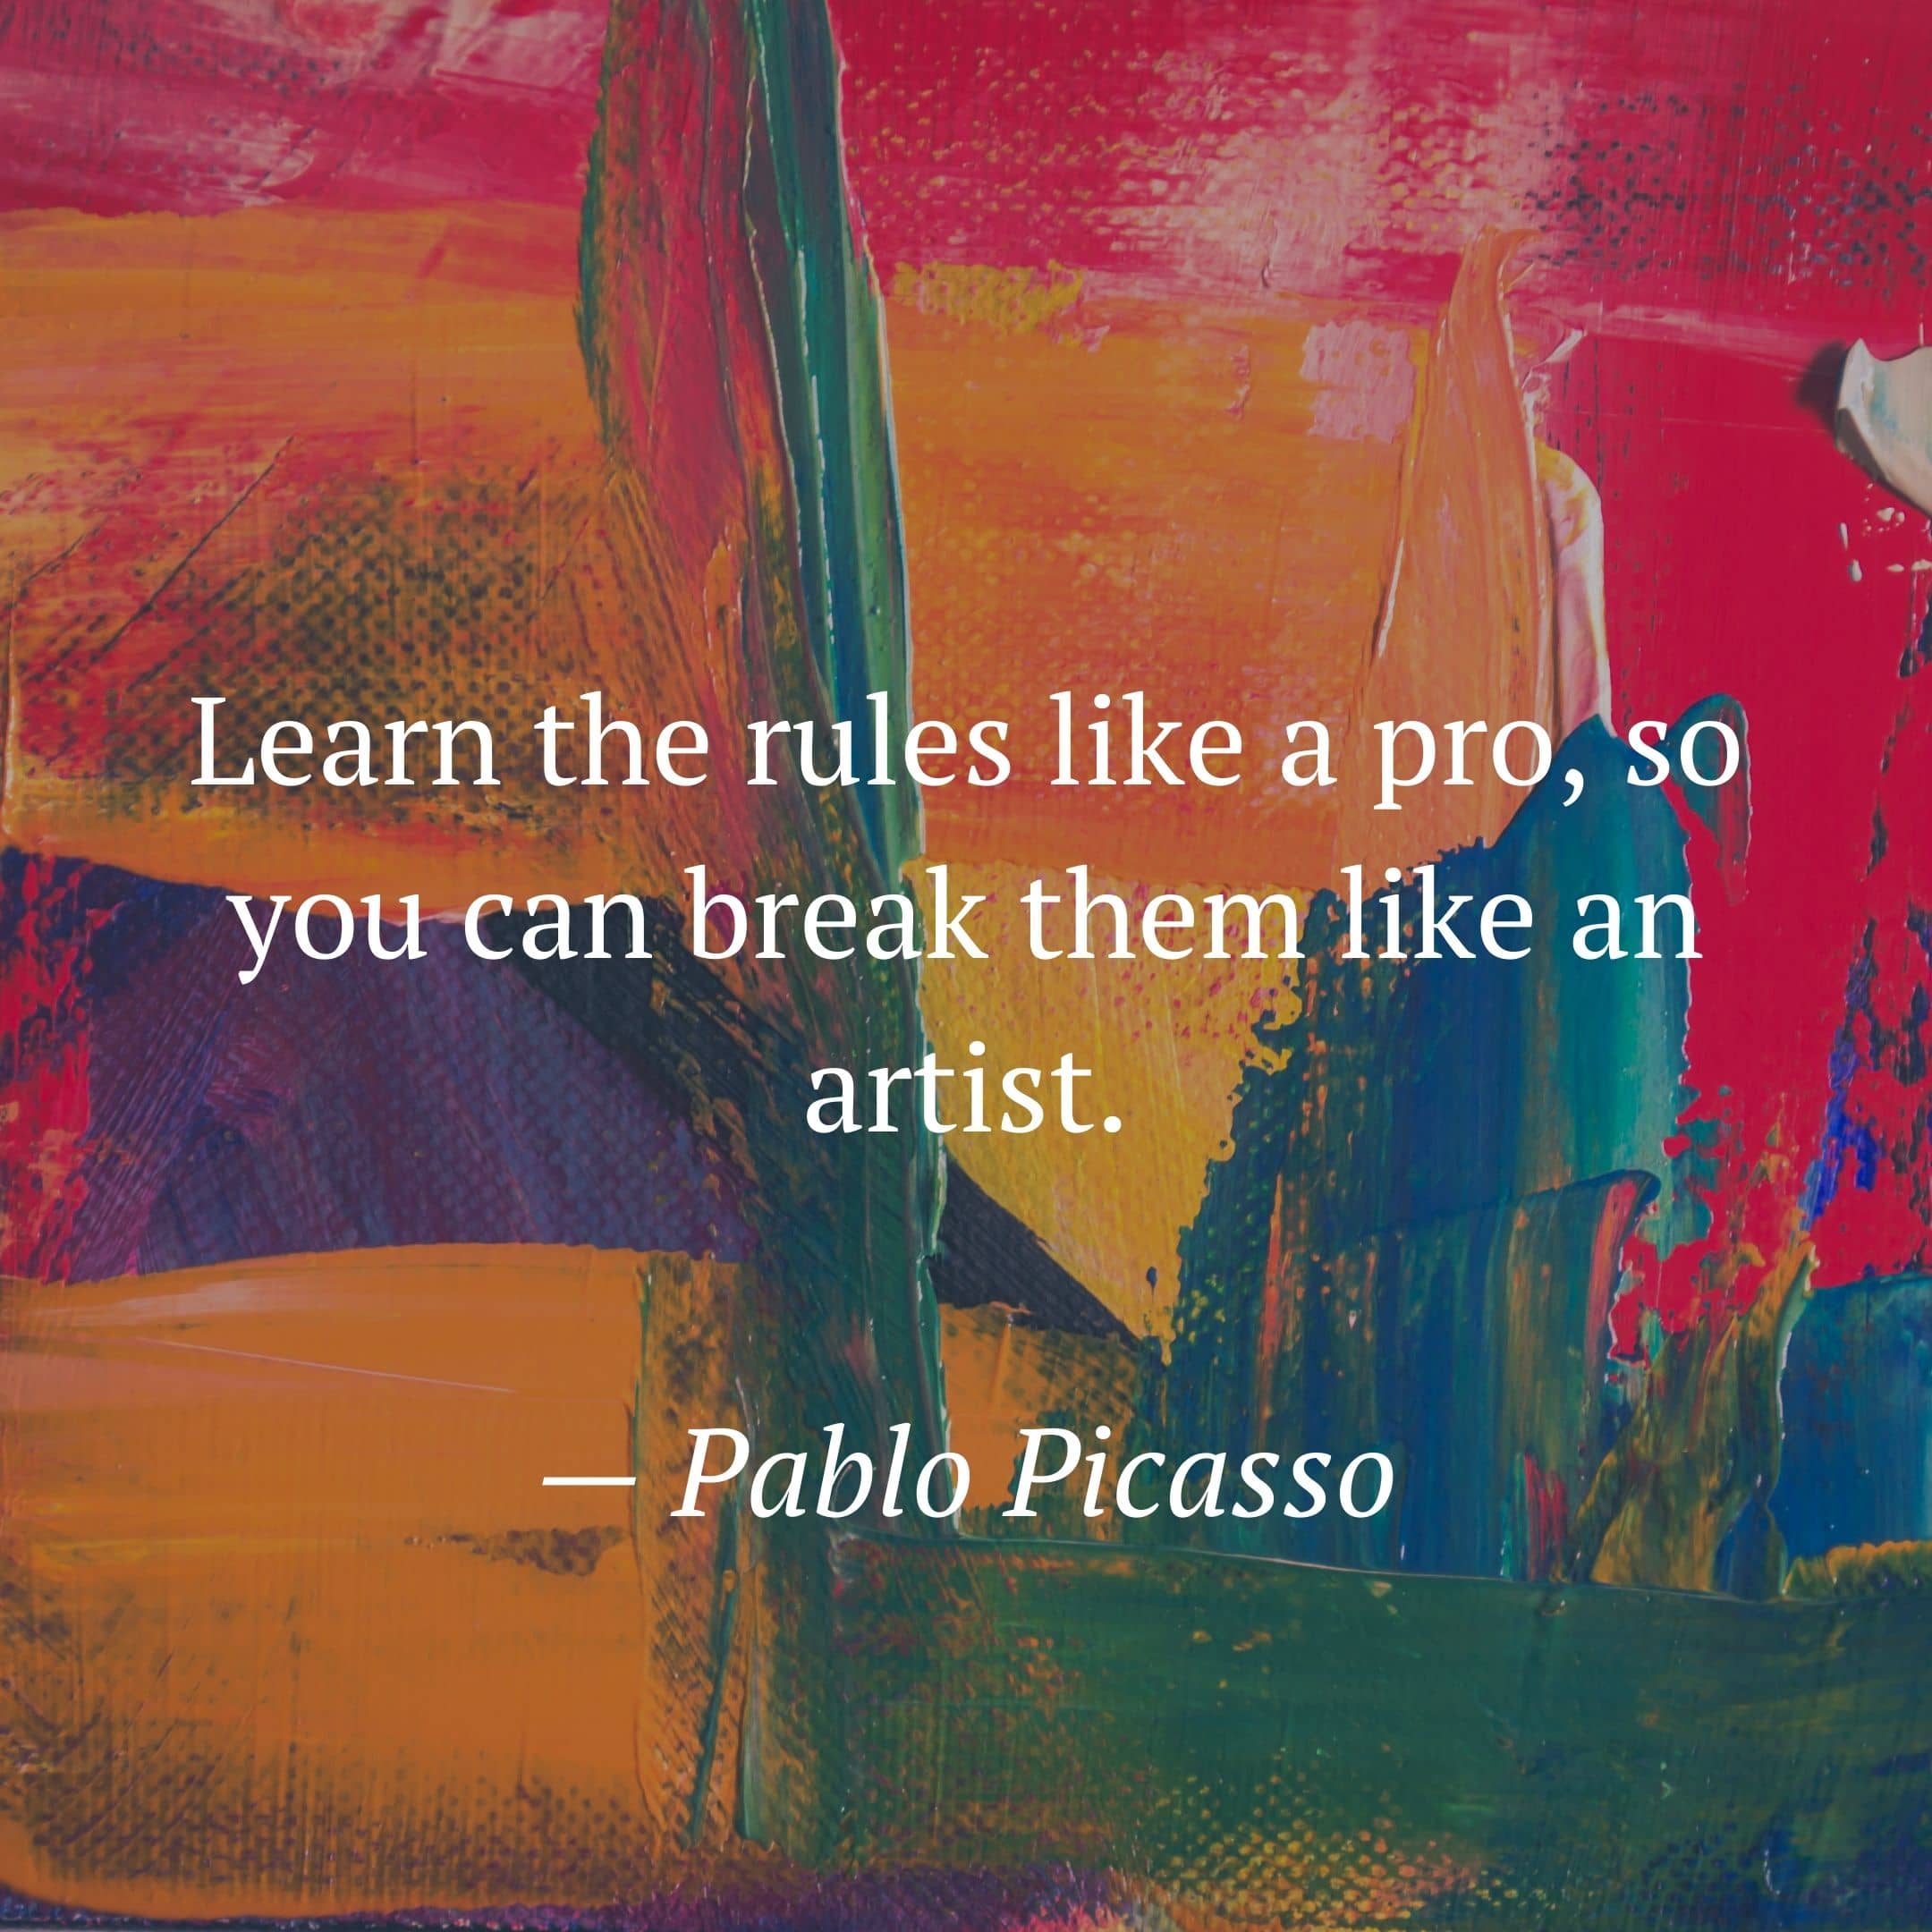 Learn the rules like a pro, so you can break them like an artist. by Pablo Picasso